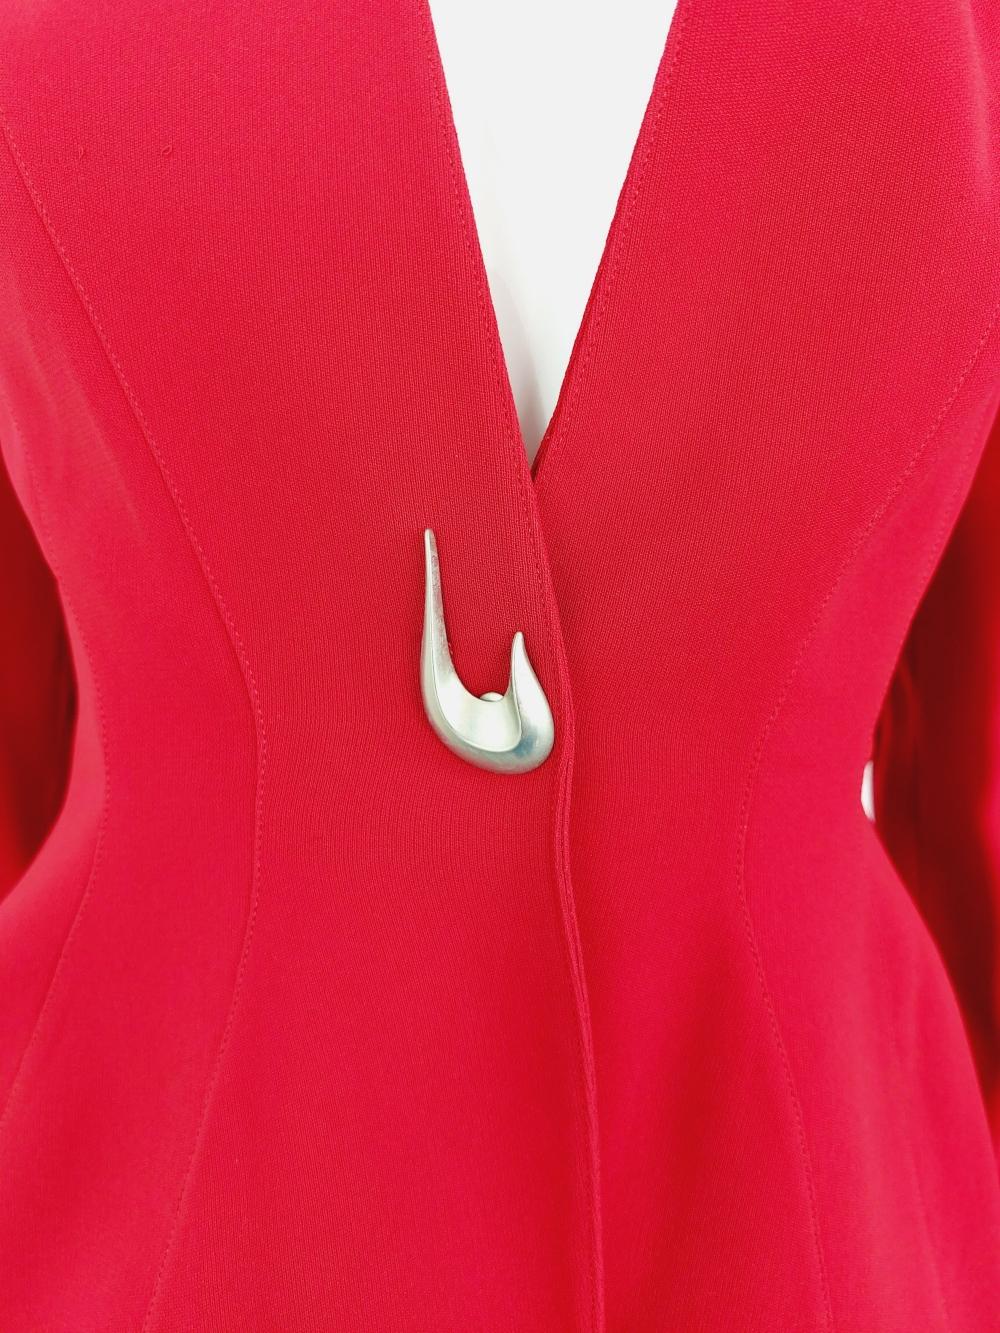 Thierry Mugler Couture 2000 AW Sculptural Red Wasp Pin Brooch Jacket Blazer 3